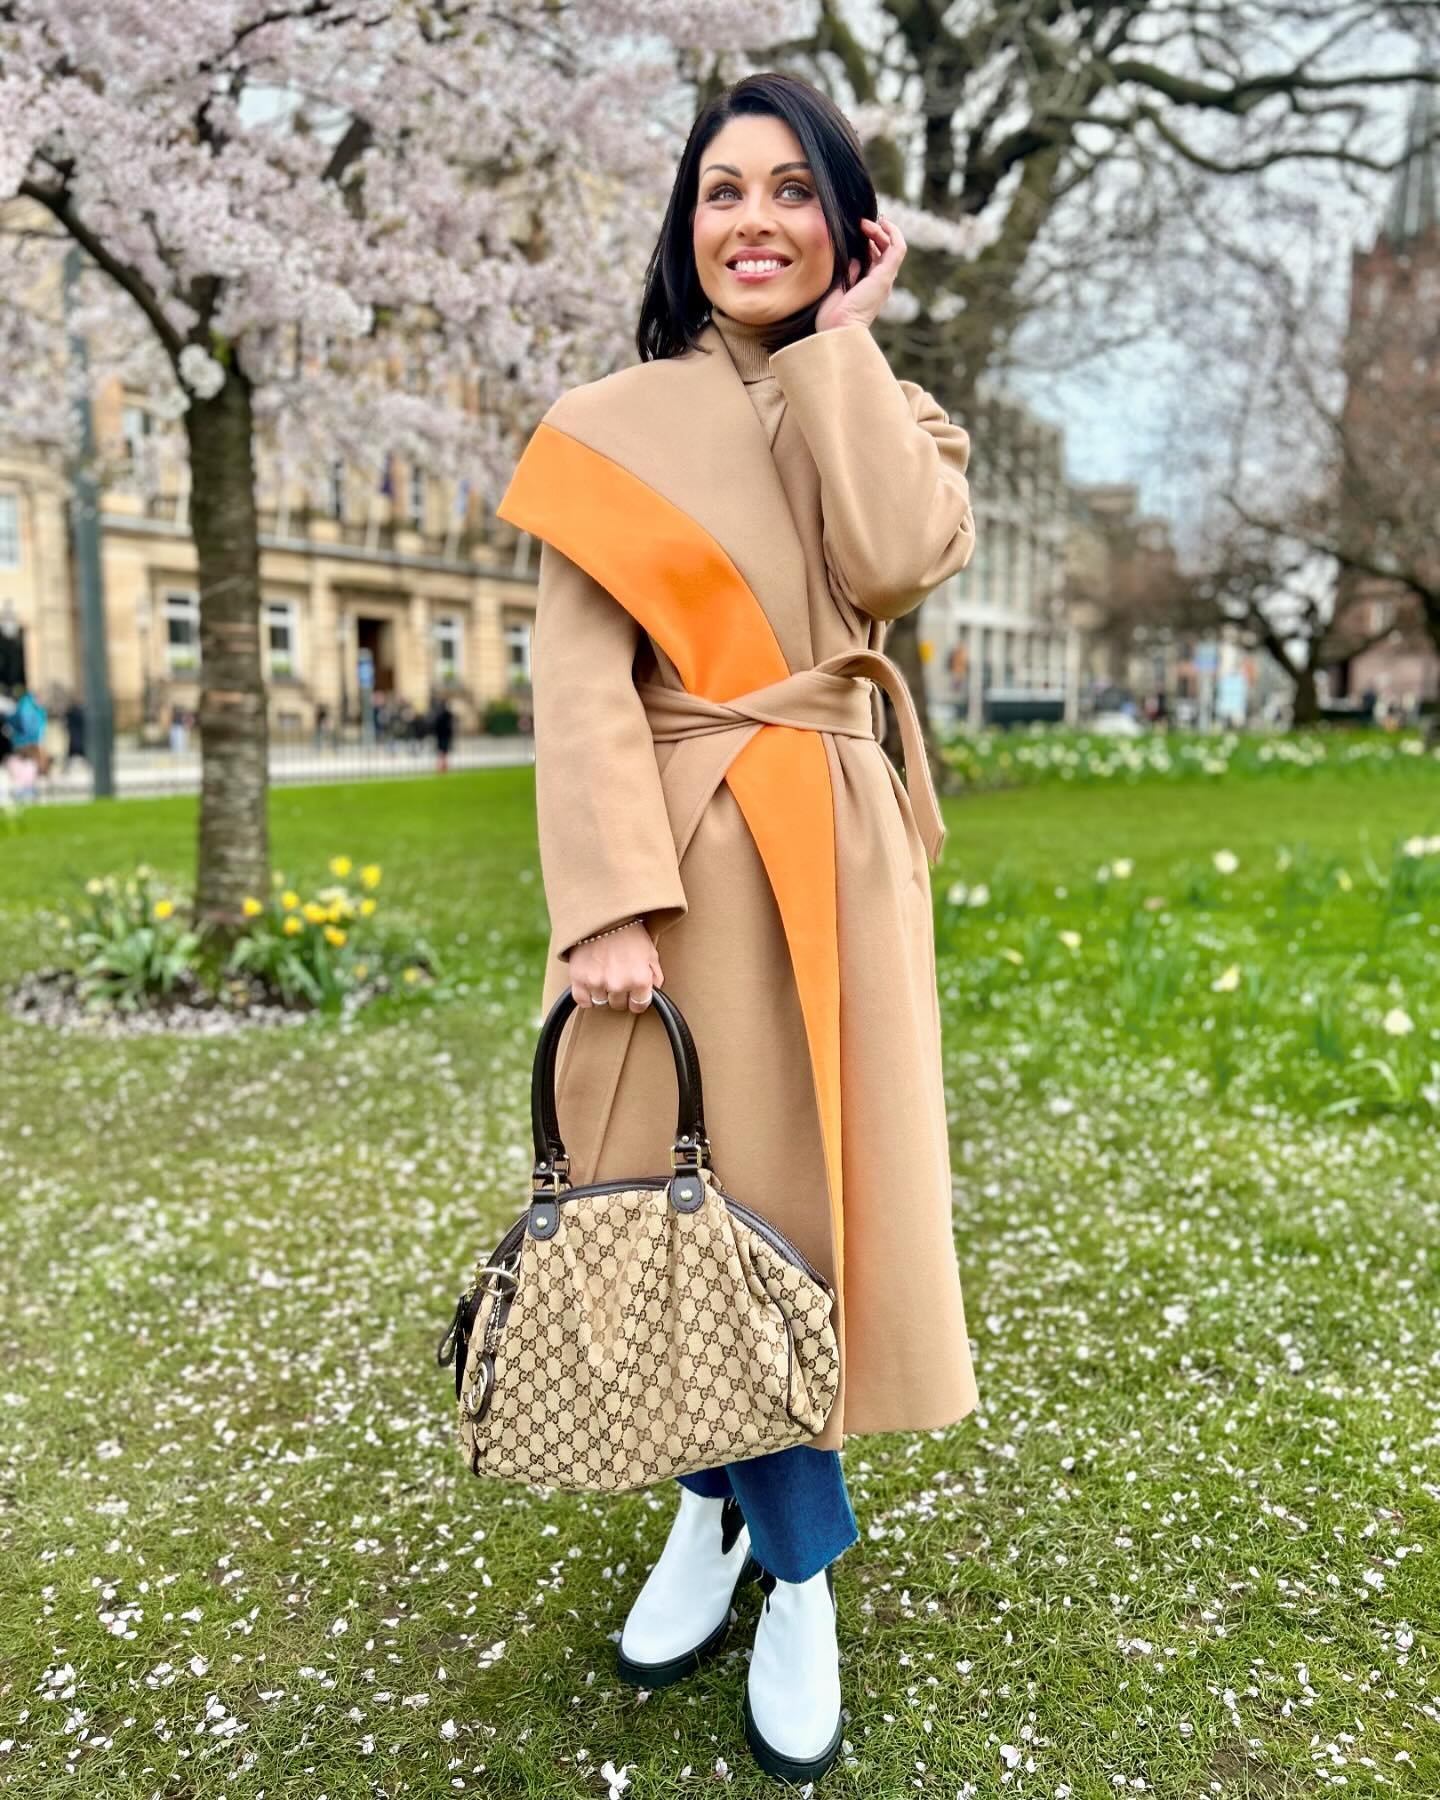 Spring has finally sprung 🌸🌸🌸 well kind of, as this was pretty much the only one hour window that it wasn&rsquo;t actually chucking it down last week!! ☔️☔️☔️
.
Coat @riverisland 
Jumper @marksandspencer 
Jeans @mintvelvet 
Boots @johnlewis 
Bag @